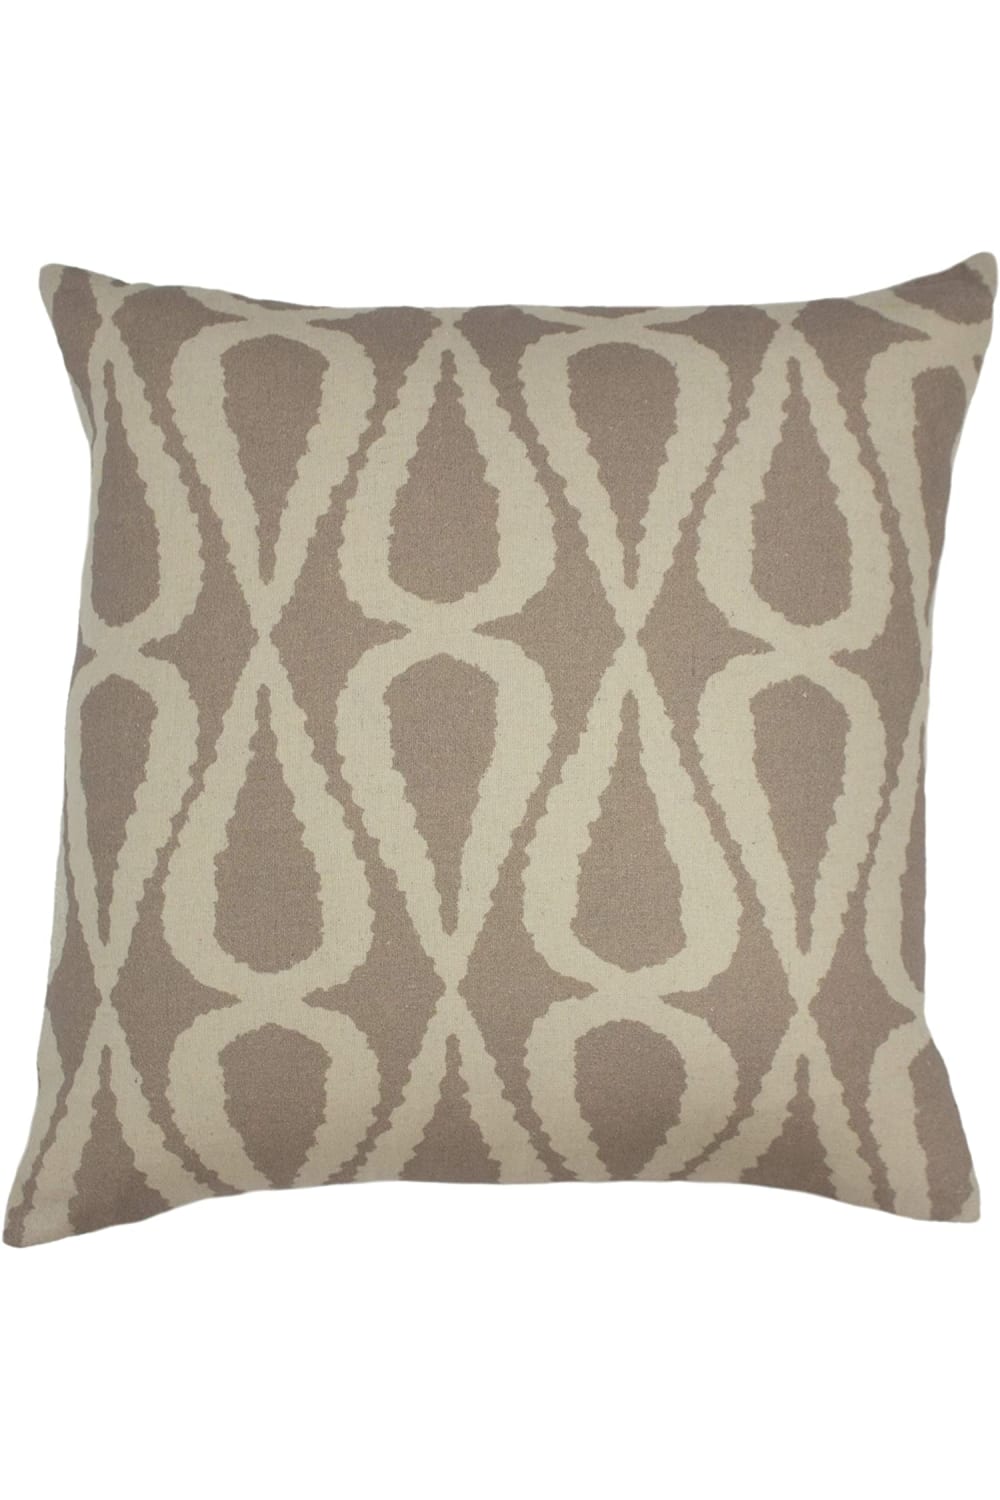 Furn Rocco Cushion Cover (Gray) (One Size)